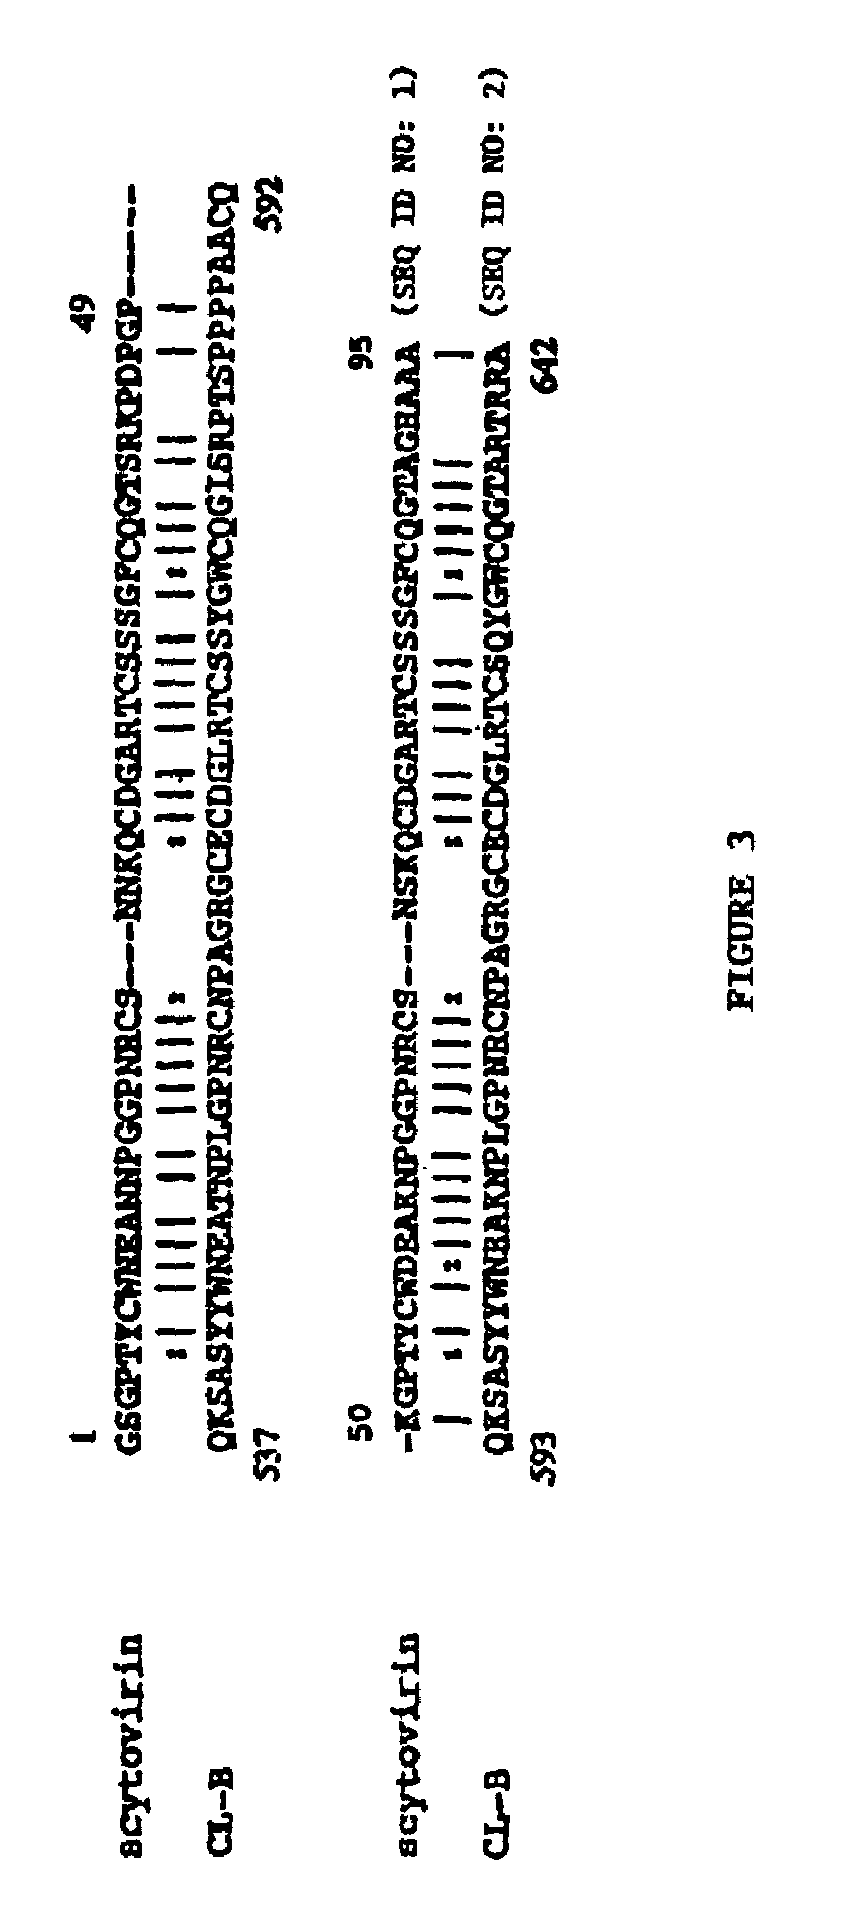 Scytovirins and related conjugates, fusion proteins, nucleic acids, vectors, host cells, compositions, antibodies and methods of using scytovirins